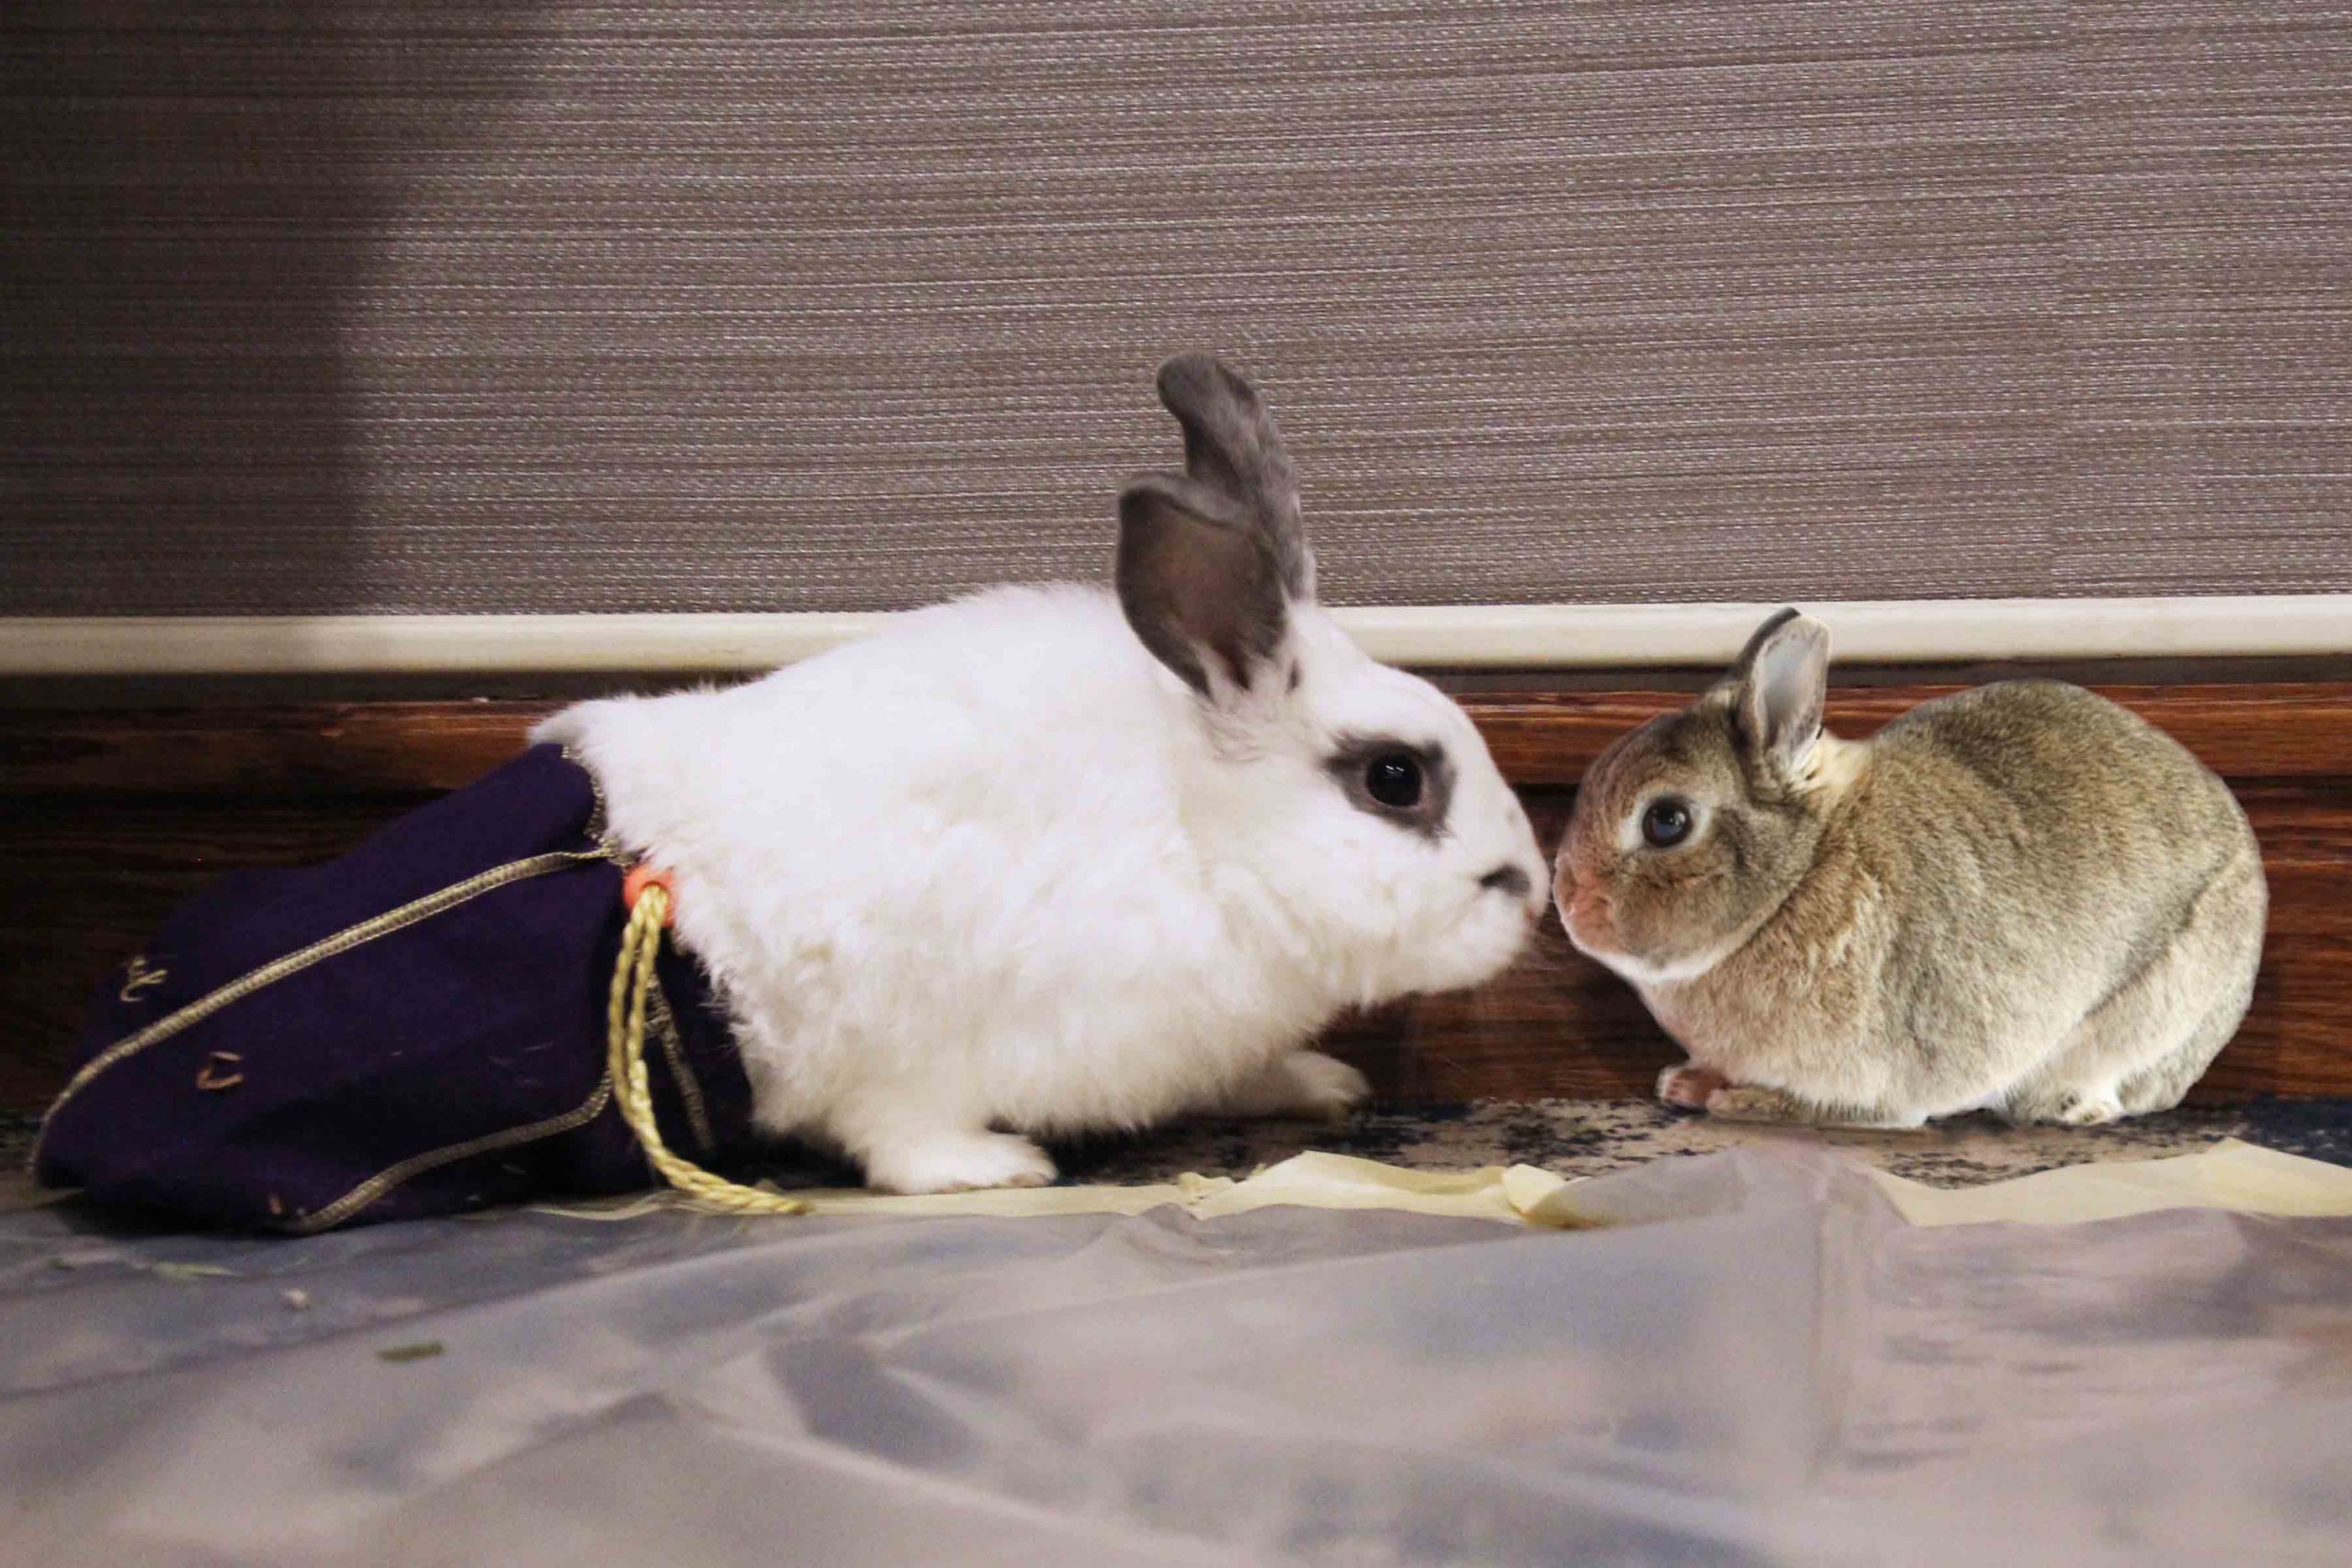 Abigail votes for her special needs bun friend Jack-In-The-Bag to be a calendar cover model. Will he win?